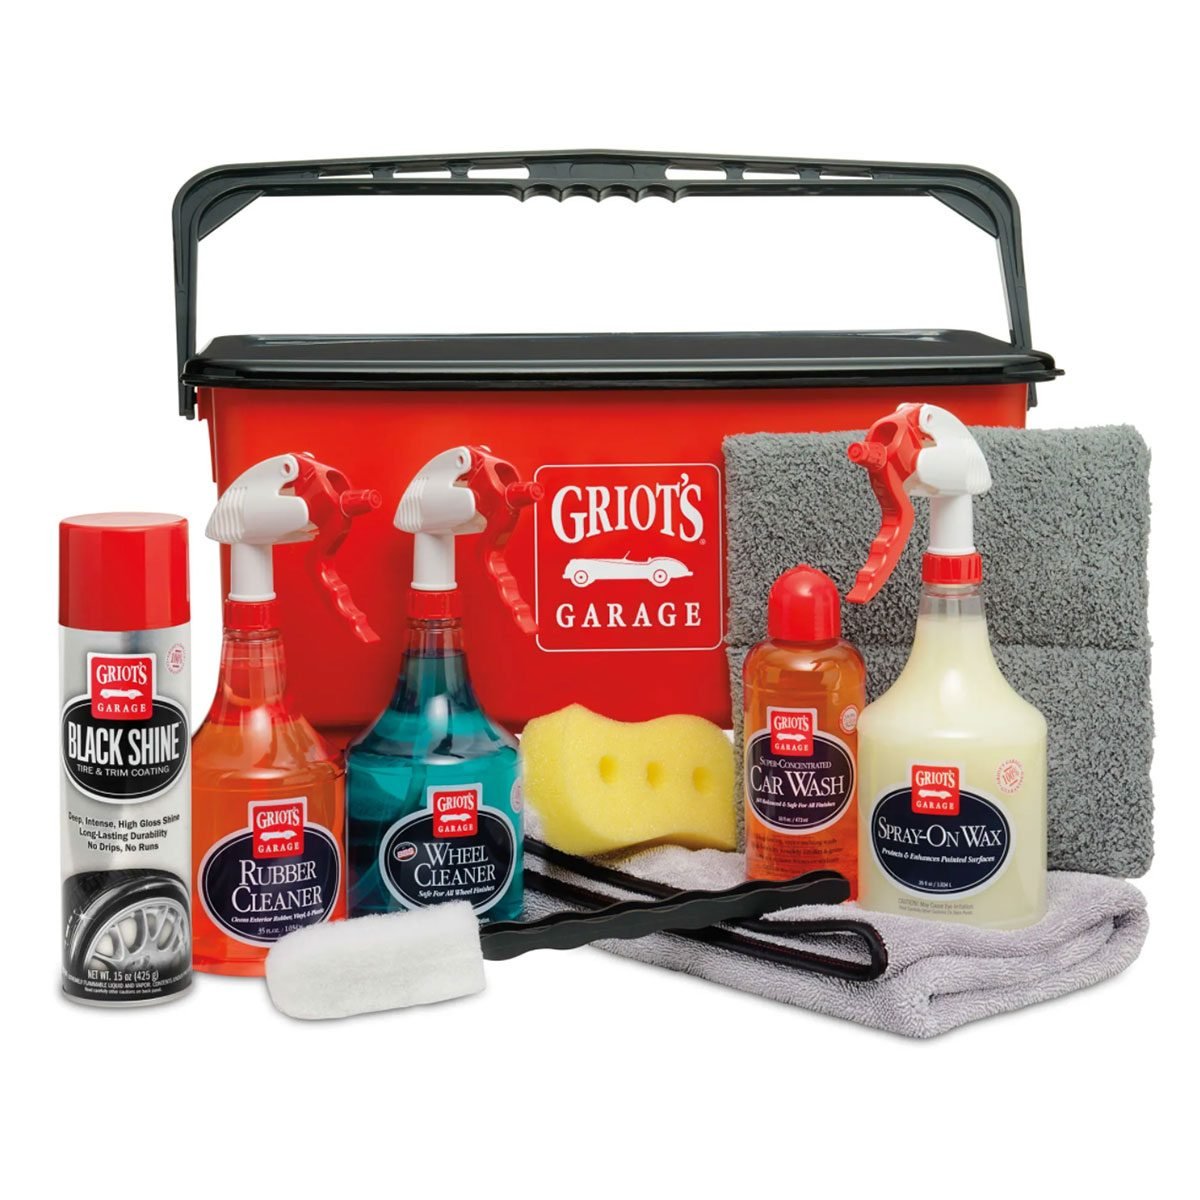 Best Car Wash Kits for Interior and Exterior Cleaning